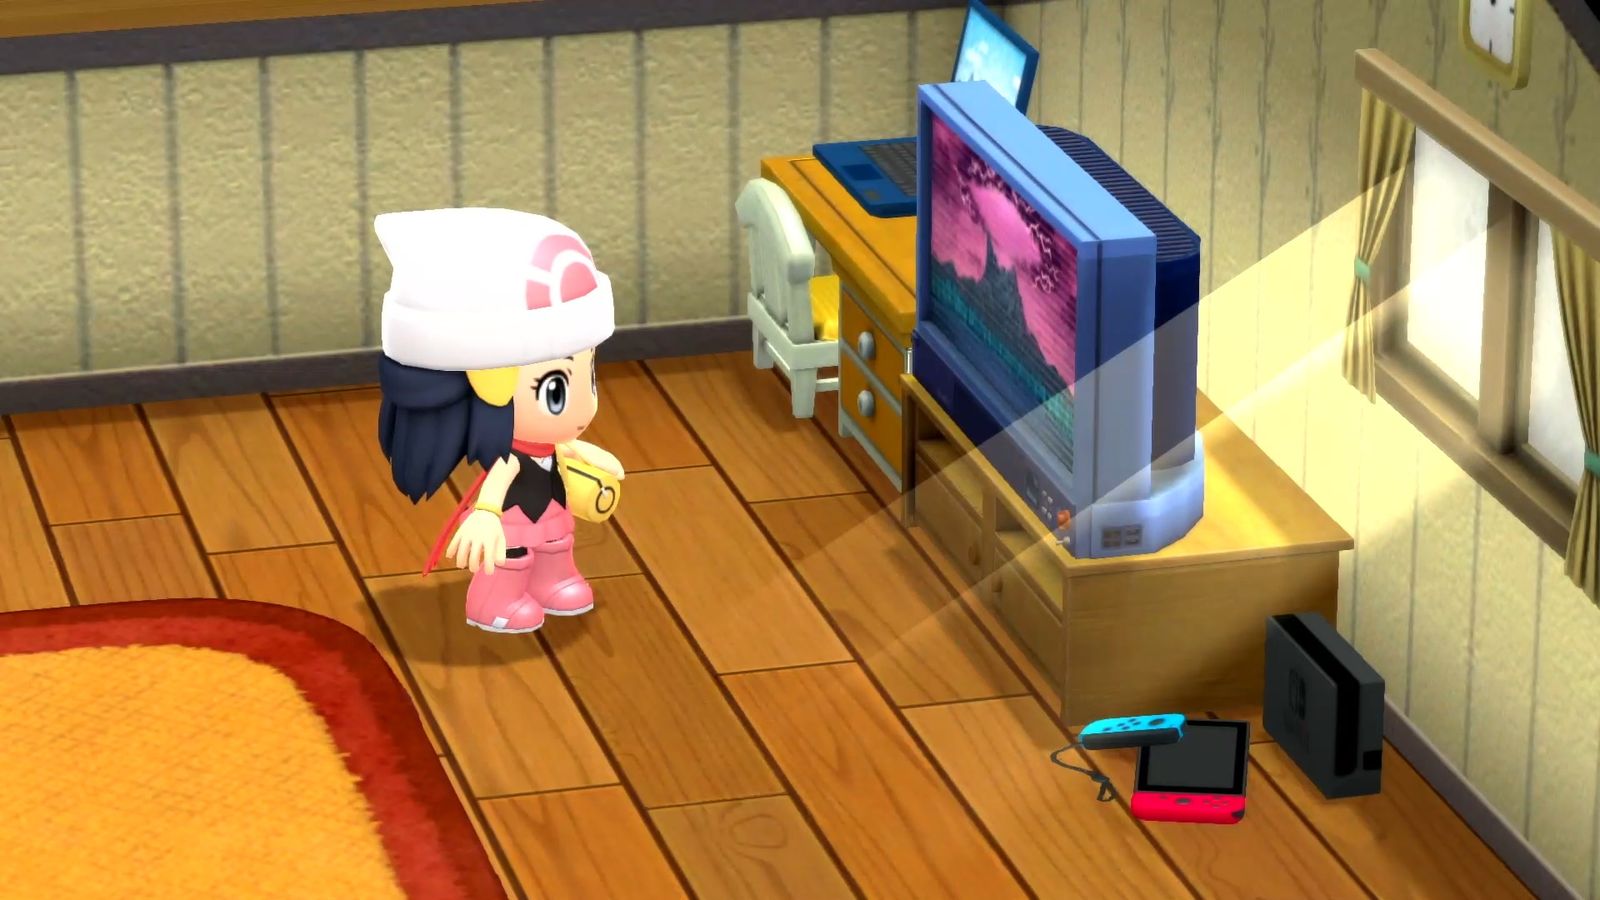 Gameplay from Pokémon Brilliant Diamond and Shining Pearl, showing the female protagonist in a chibi style watching the television.